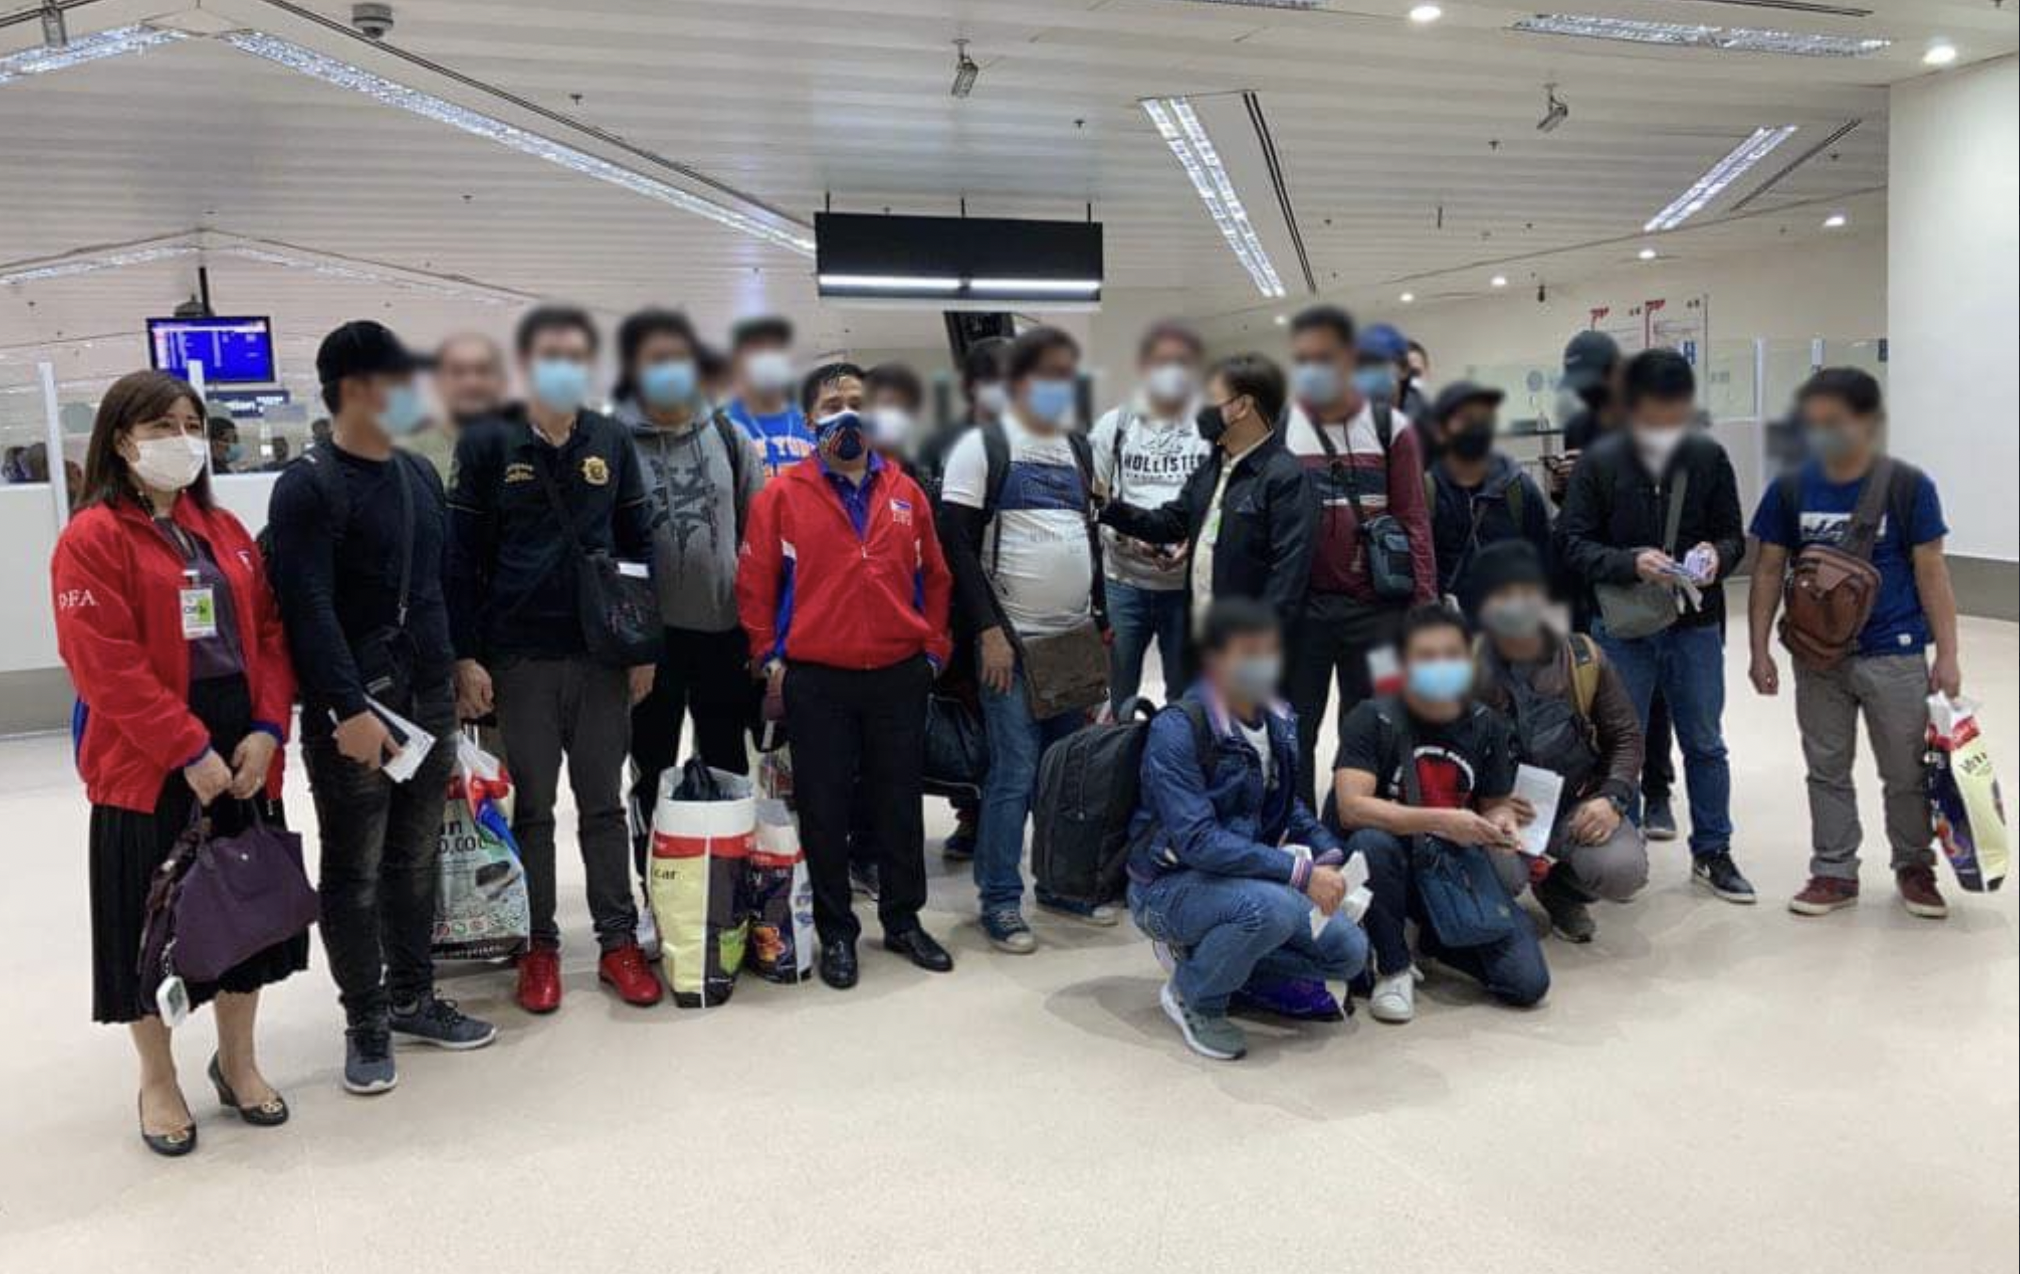 Twenty-one Filipino seafarers who were stranded in Ukraine in view of the ongoing crisis there returned to the Philippines on Tuesday, a Department of Foreign Affairs (DFA) official said.